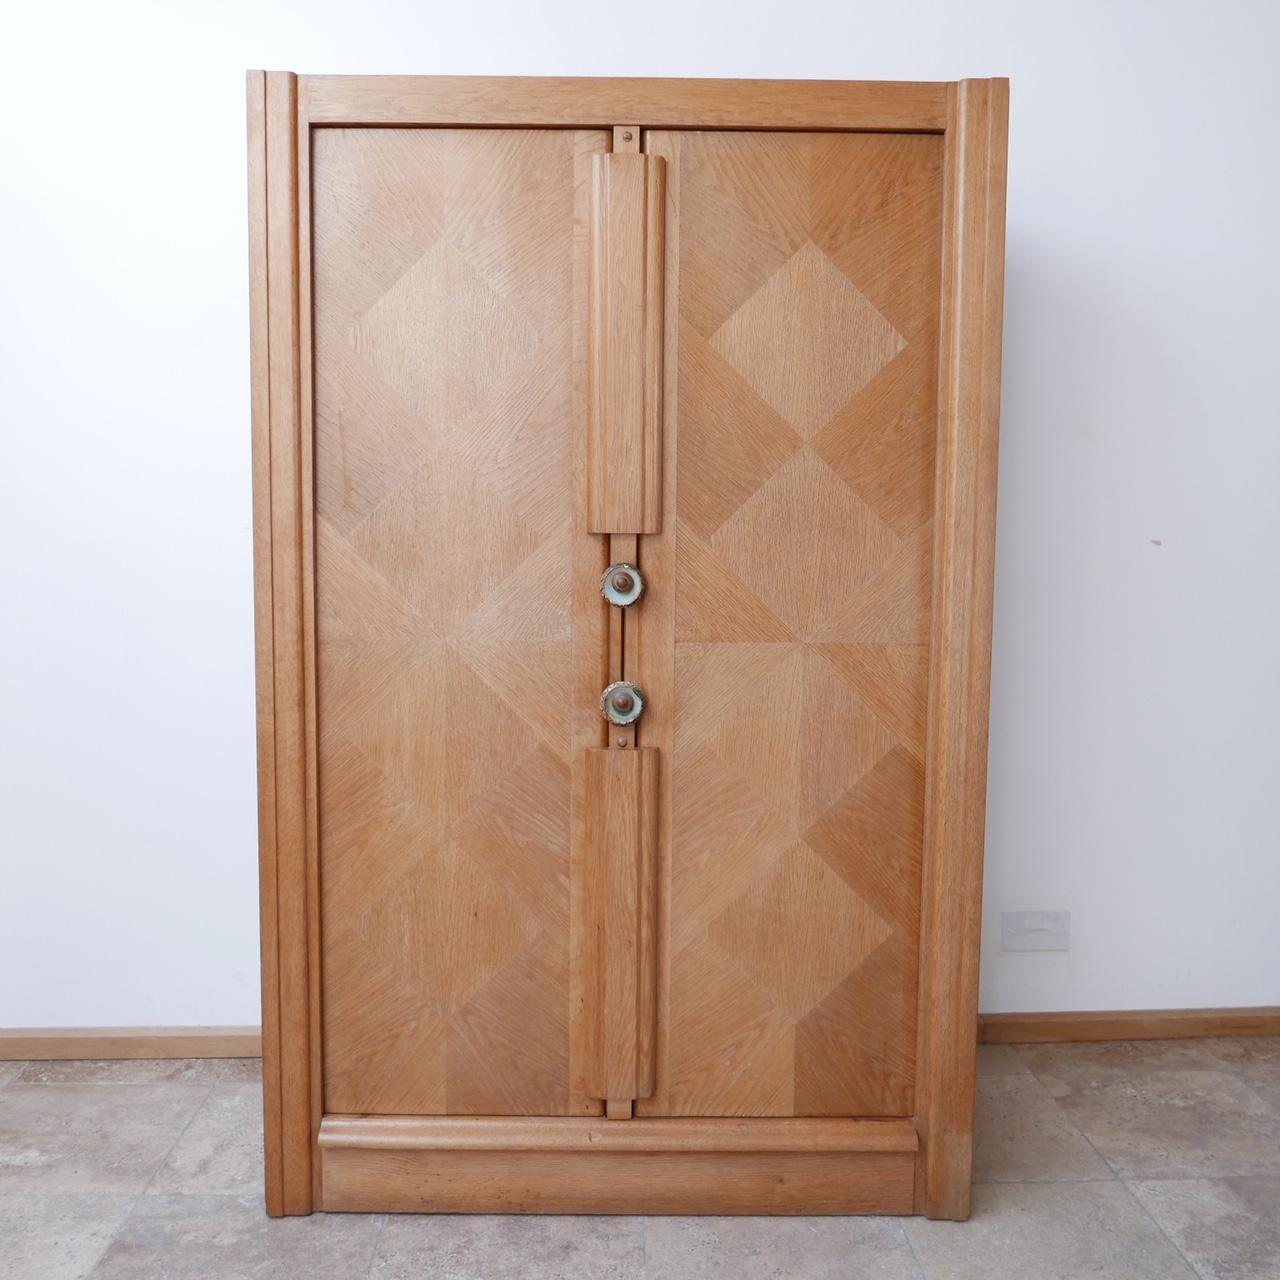 A two door cabinet/wardrobe from design legends Guillerme et Chambron. 

France, c1960s. 

Oak with original ceramic handles. 

Generally good condition, some wear commensurate with age. 

Dimensions: 110 W x 47.5 D x 173 H in cm.